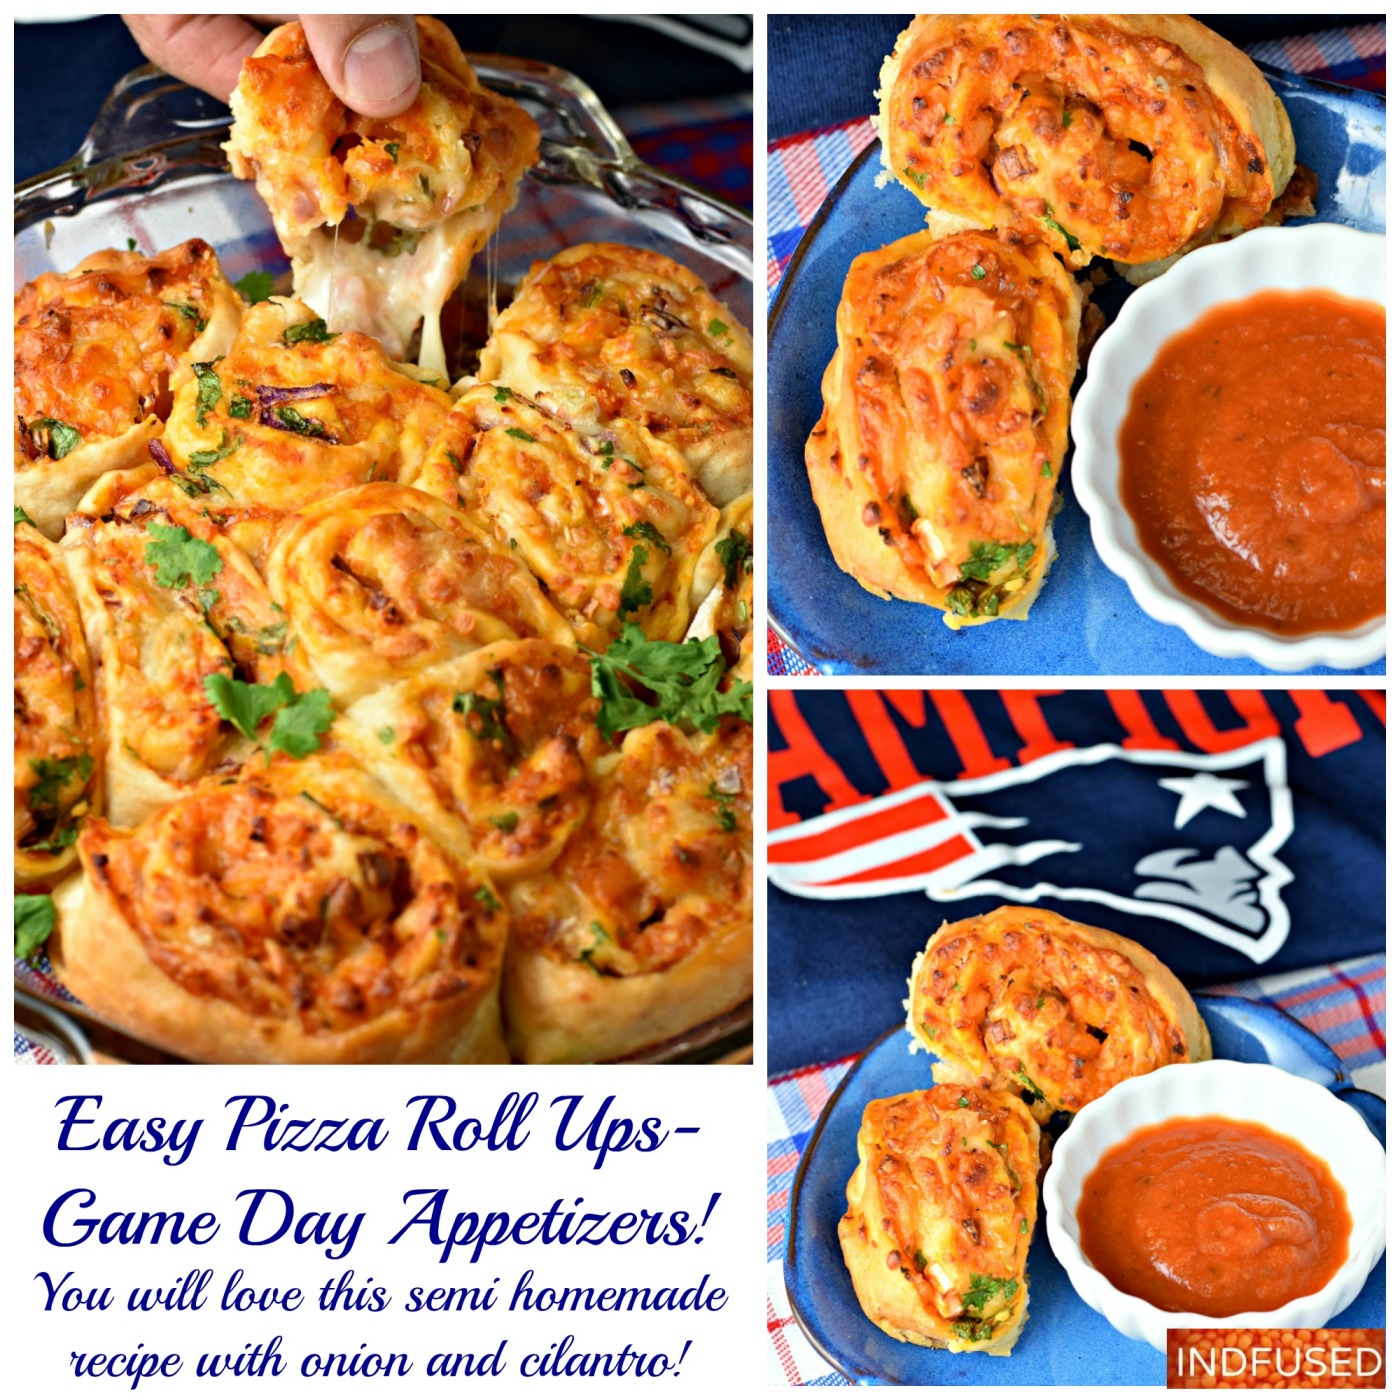 Easy Pizza Roll Ups-Game Day Appetizers